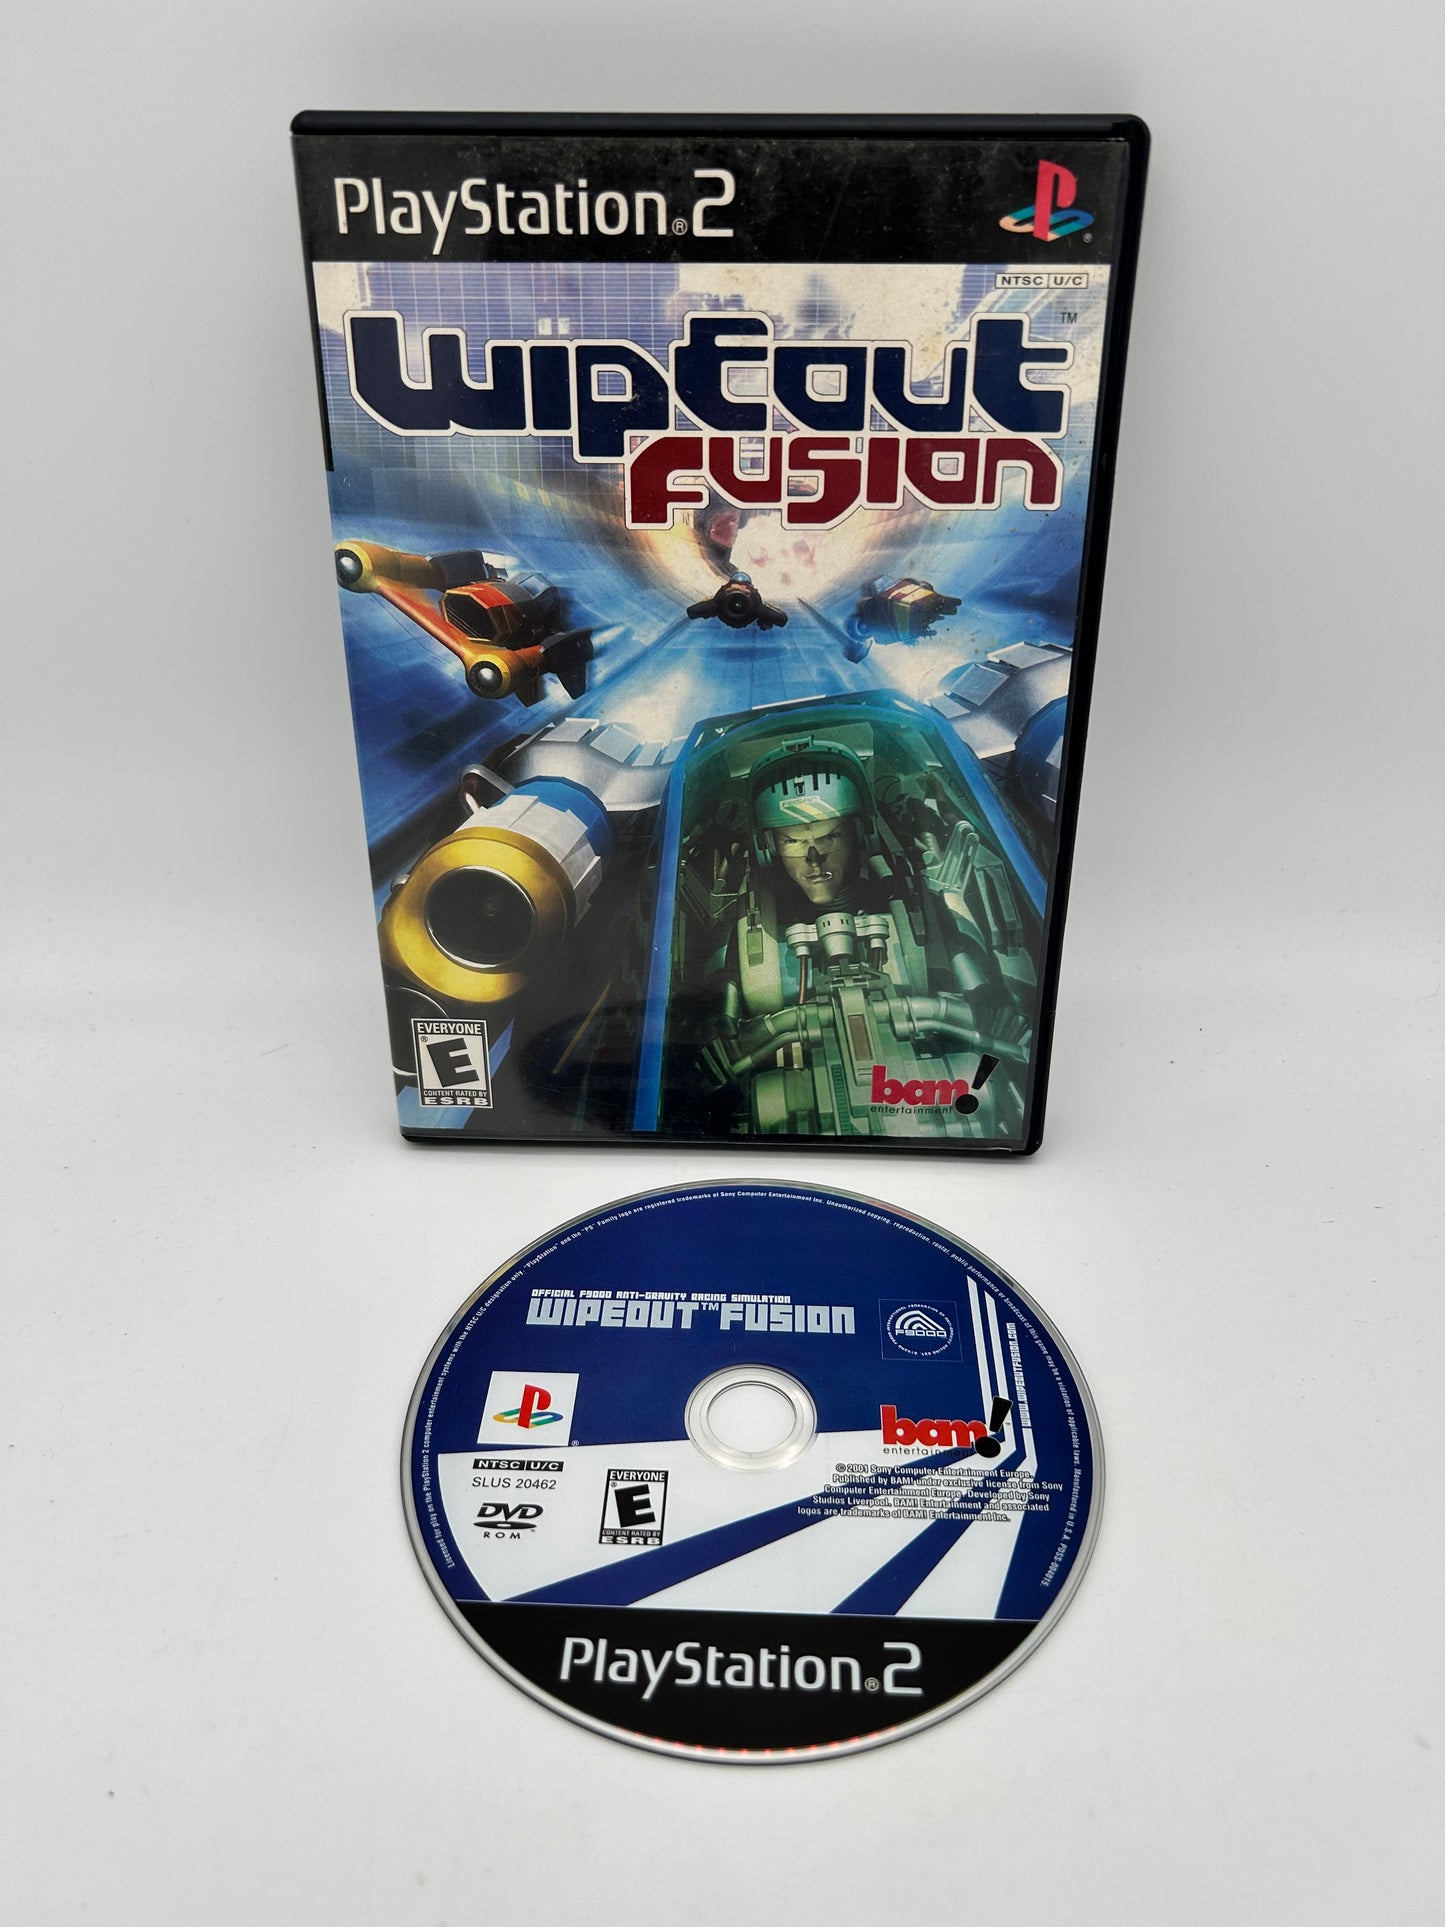 PiXEL-RETRO.COM : SONY PLAYSTATION 2 (PS2) COMPLET CIB BOX MANUAL GAME NTSC WIPEOUT FUSION